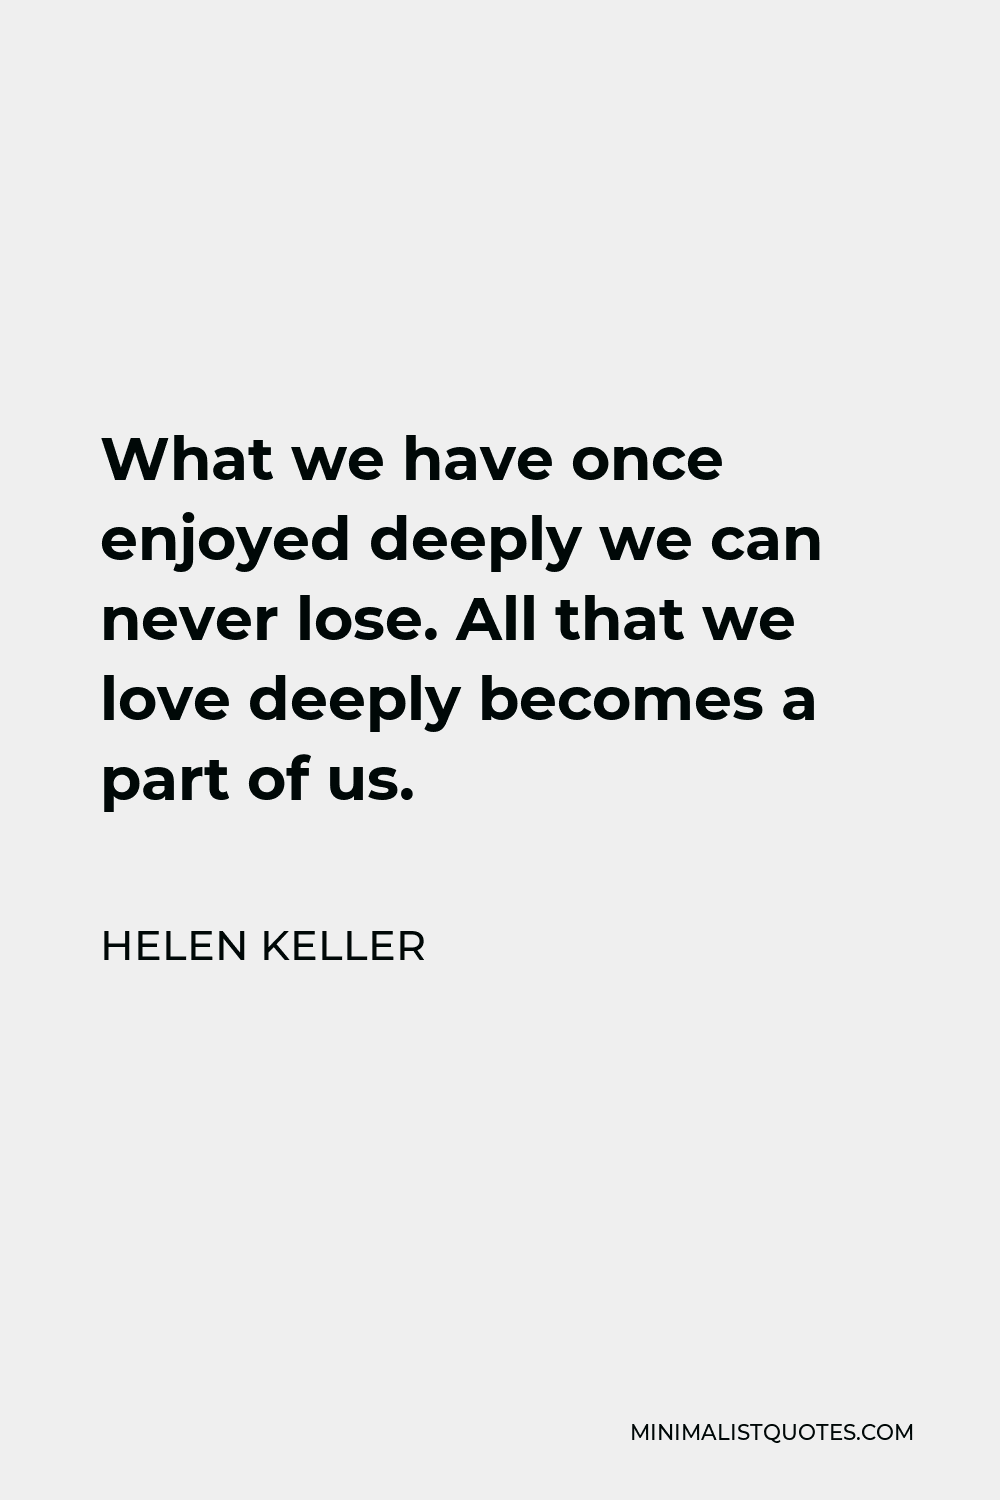 Helen Keller Quote - What we have once enjoyed deeply we can never lose. All that we love deeply becomes a part of us.